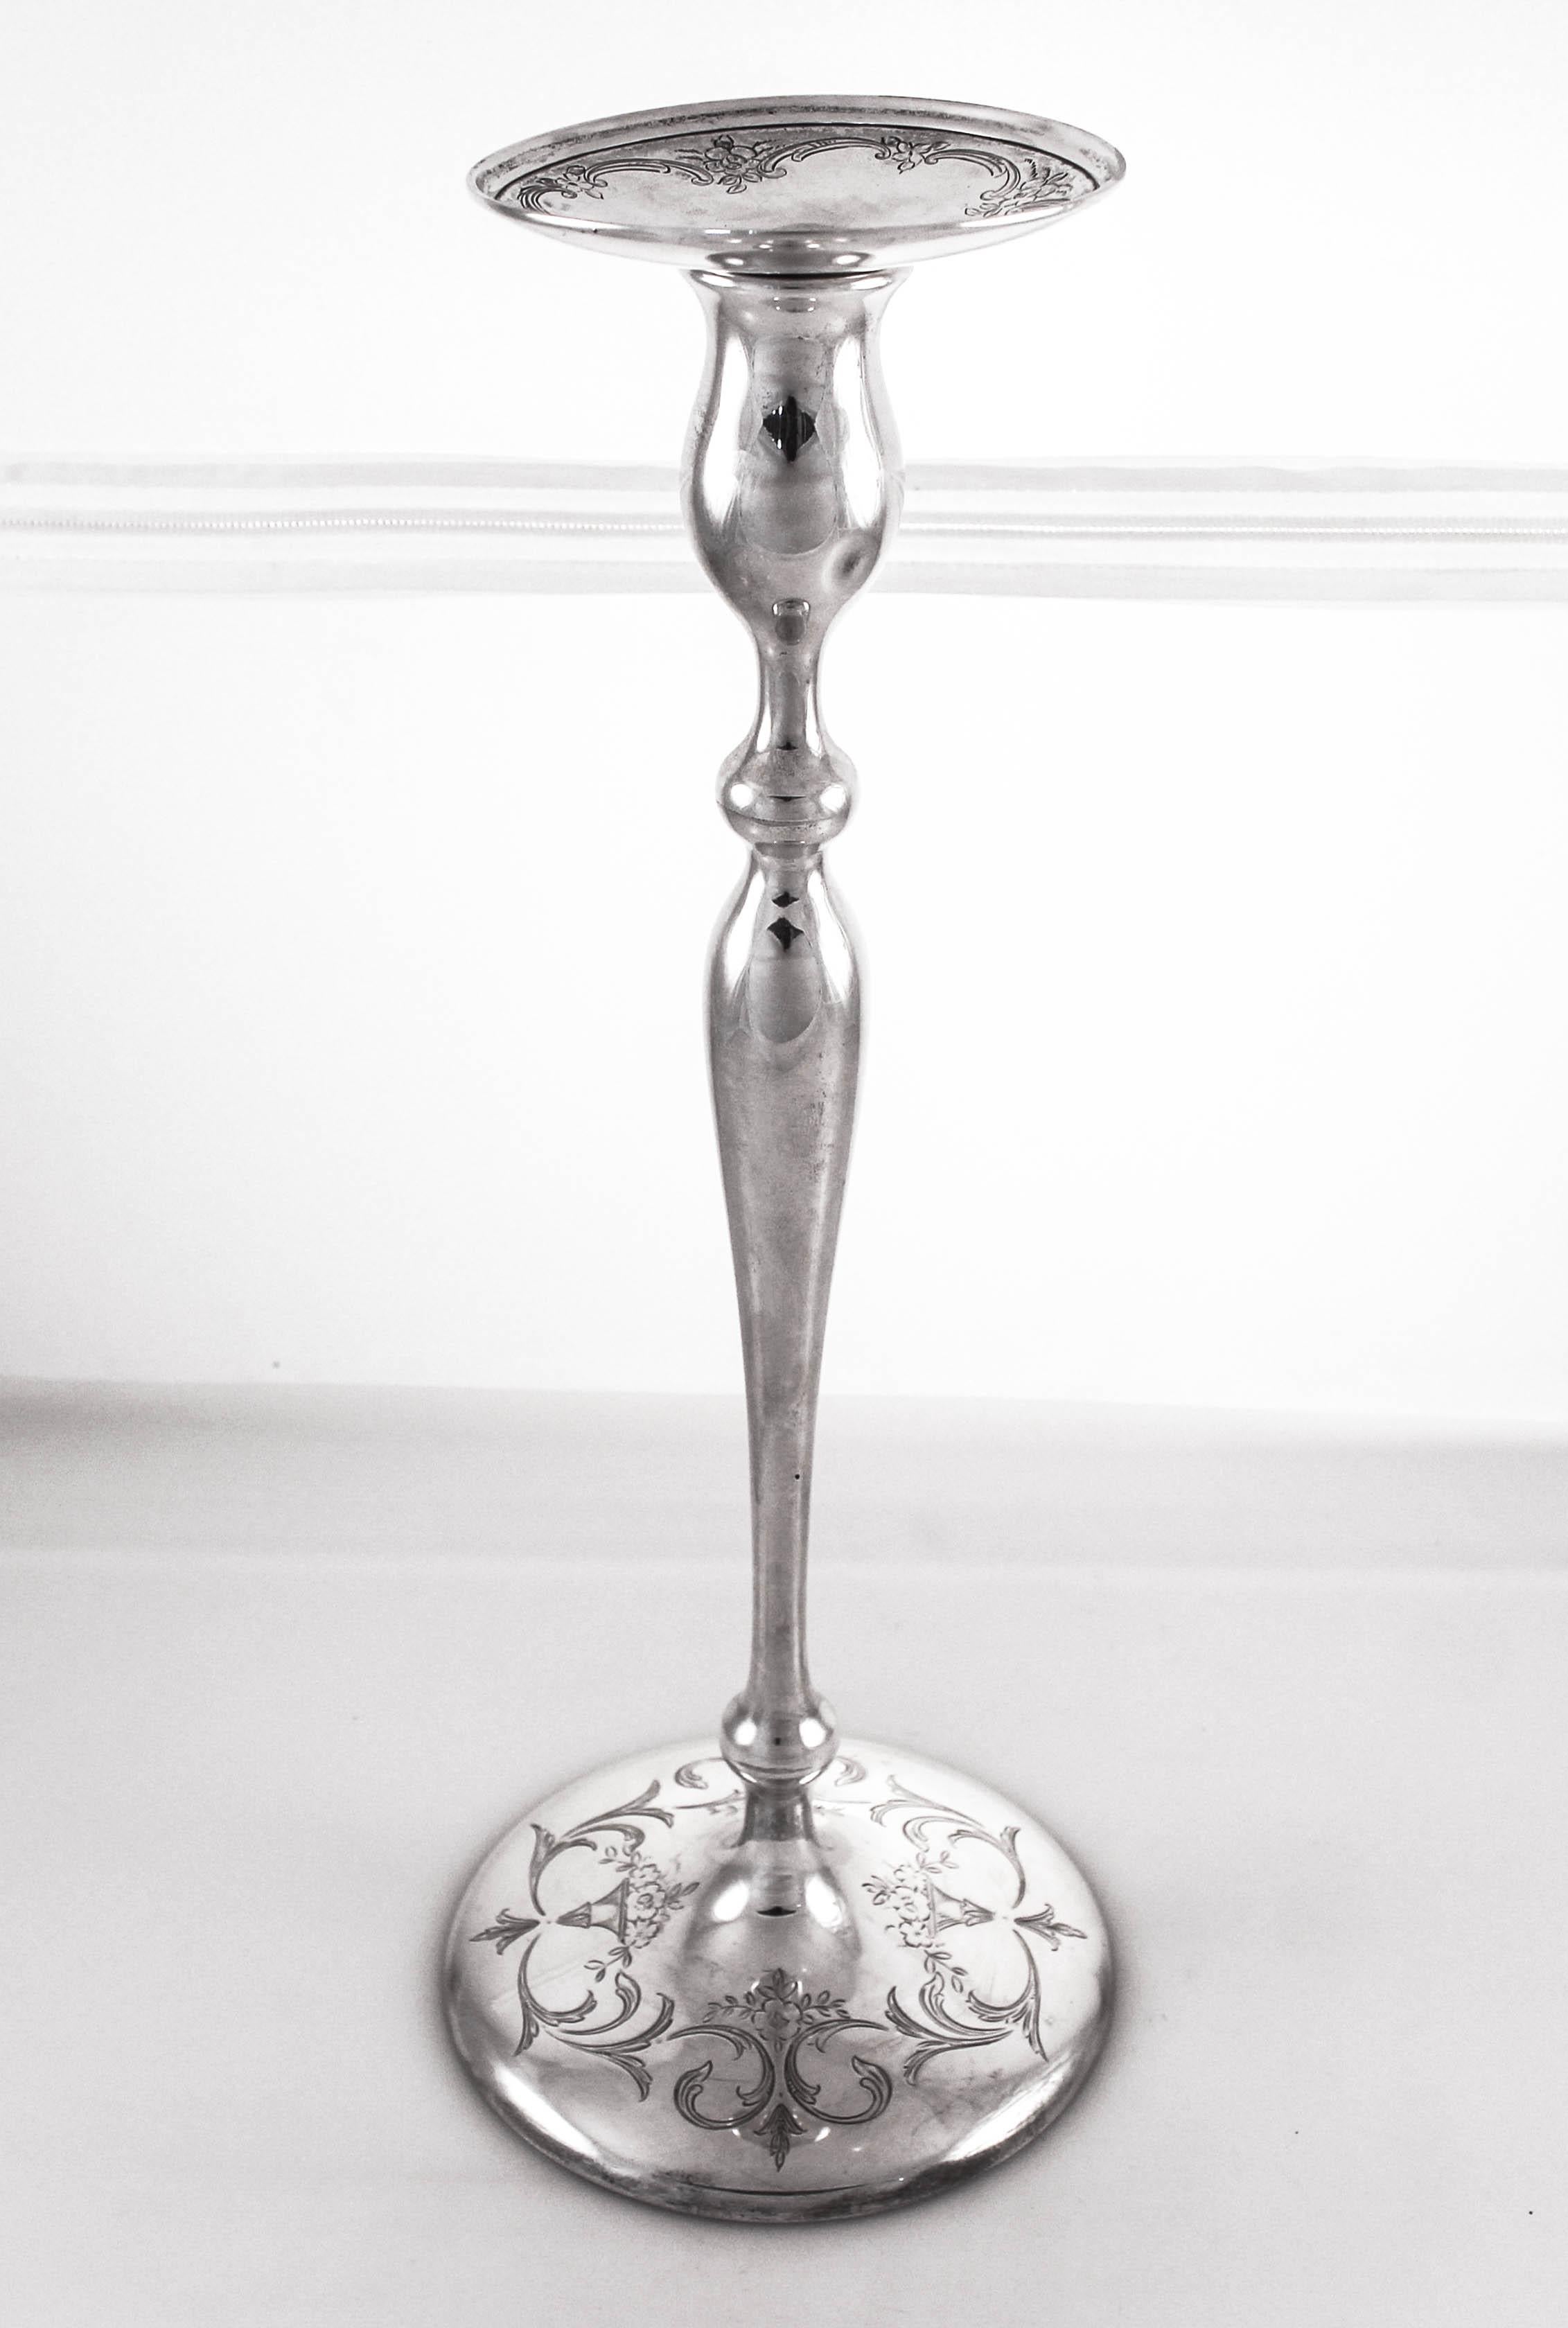 An exceptional pair of sterling silver candlesticks by Shreve Crump and Low of San Francisco. Delicate etching can be found around the base and bobeche. They are very tall and have a feminine silhouette. Curves and a tapered bottom that make them so